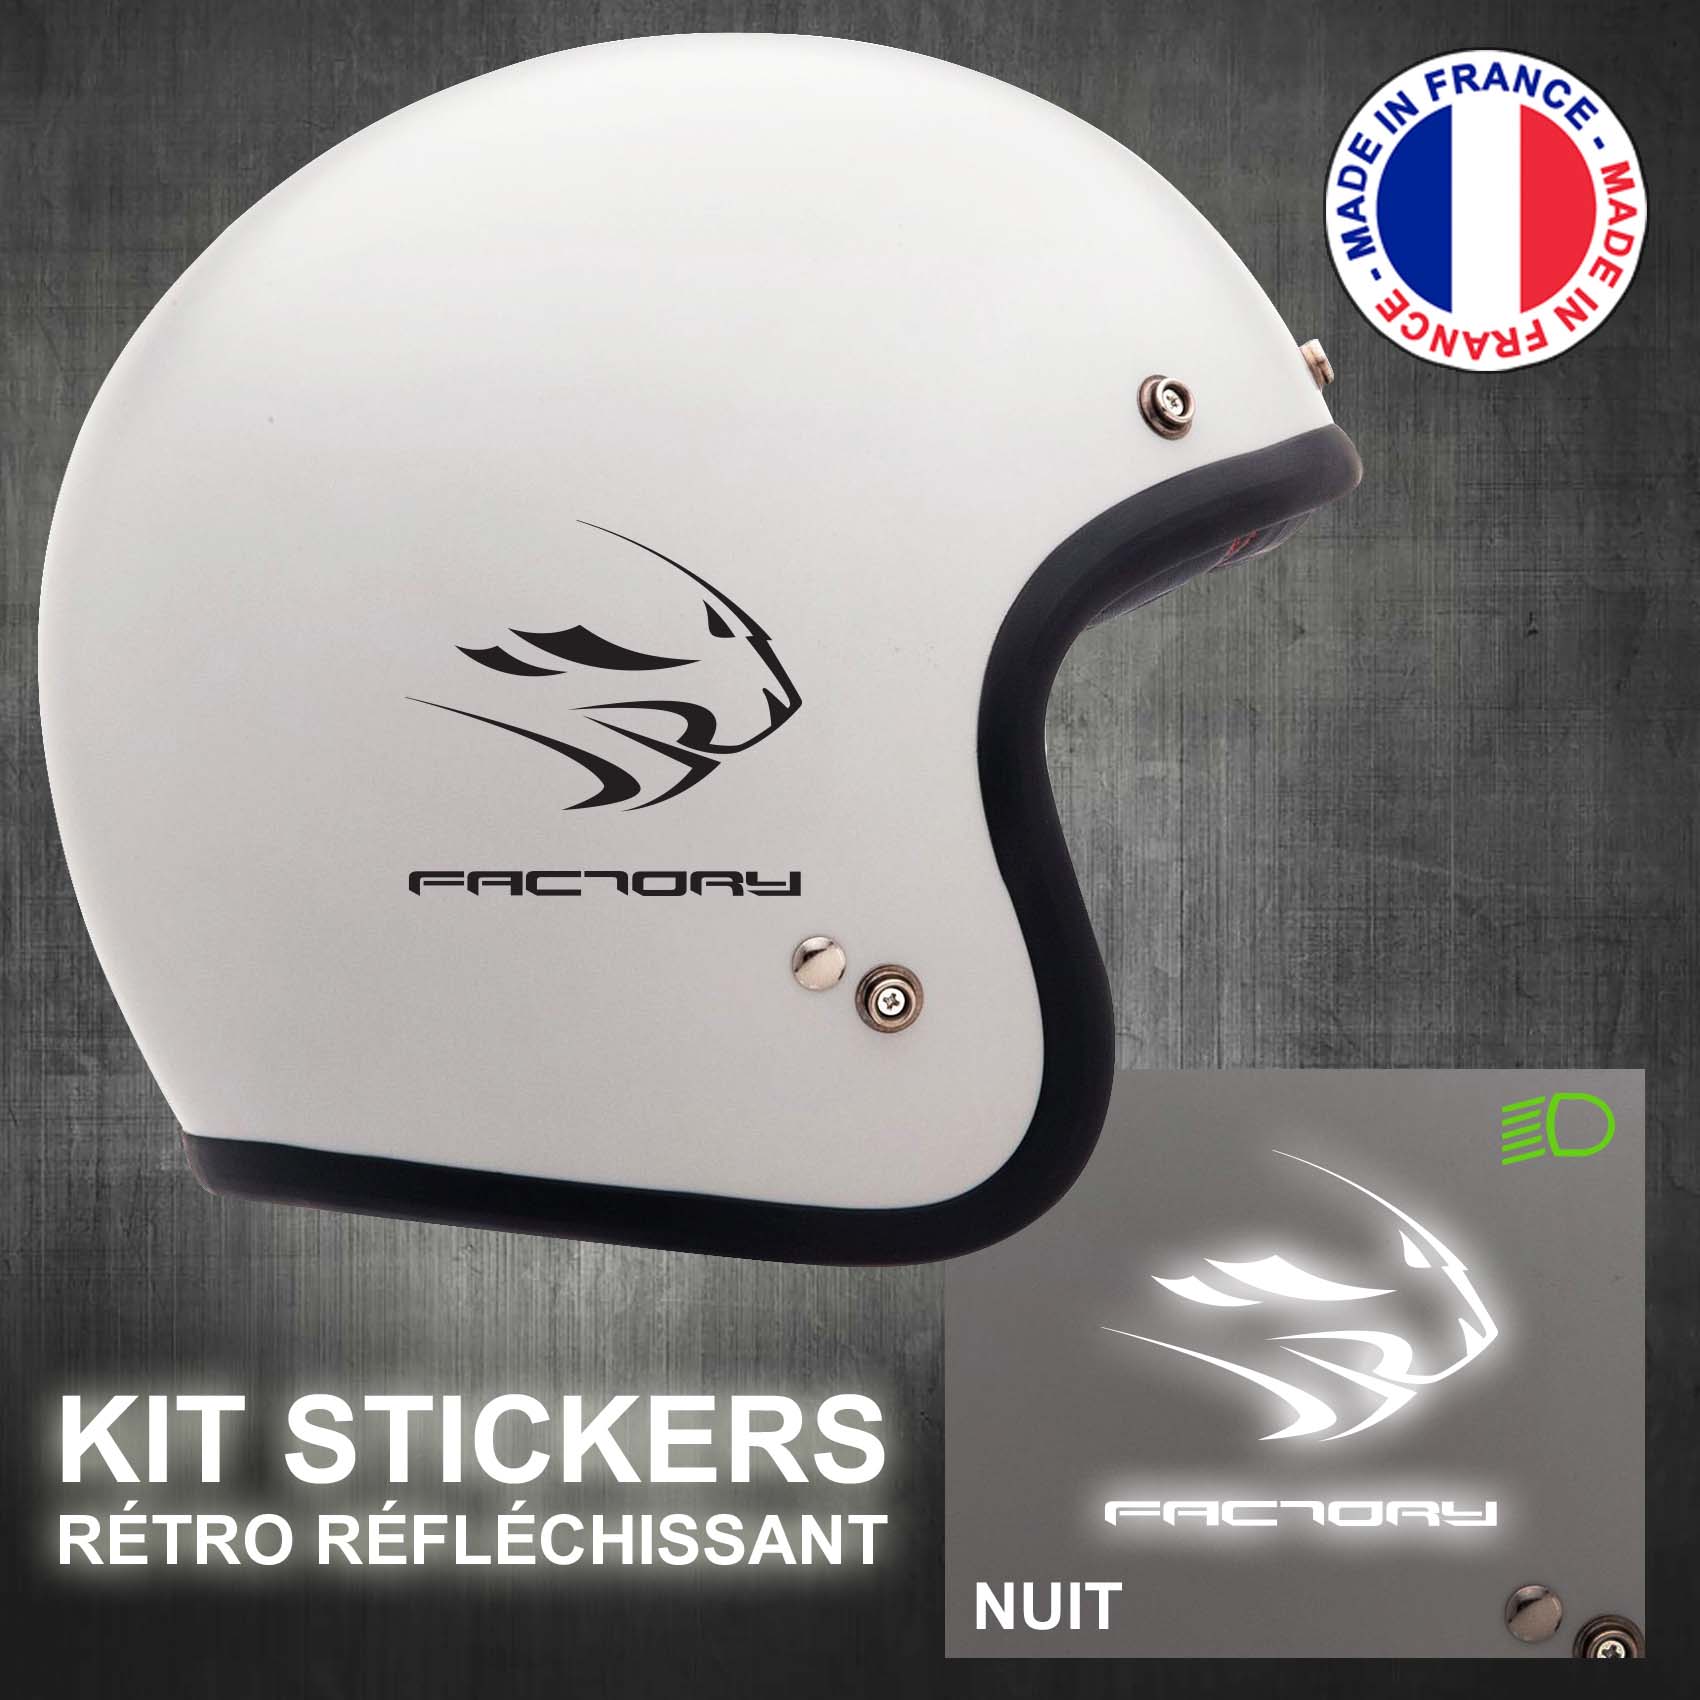 stickers-casque-moto-aprilia-factory-ref5-retro-reflechissant-autocollant-blanc-moto-velo-tuning-racing-route-sticker-casques-adhesif-scooter-nuit-securite-decals-personnalise-personnalisable-min